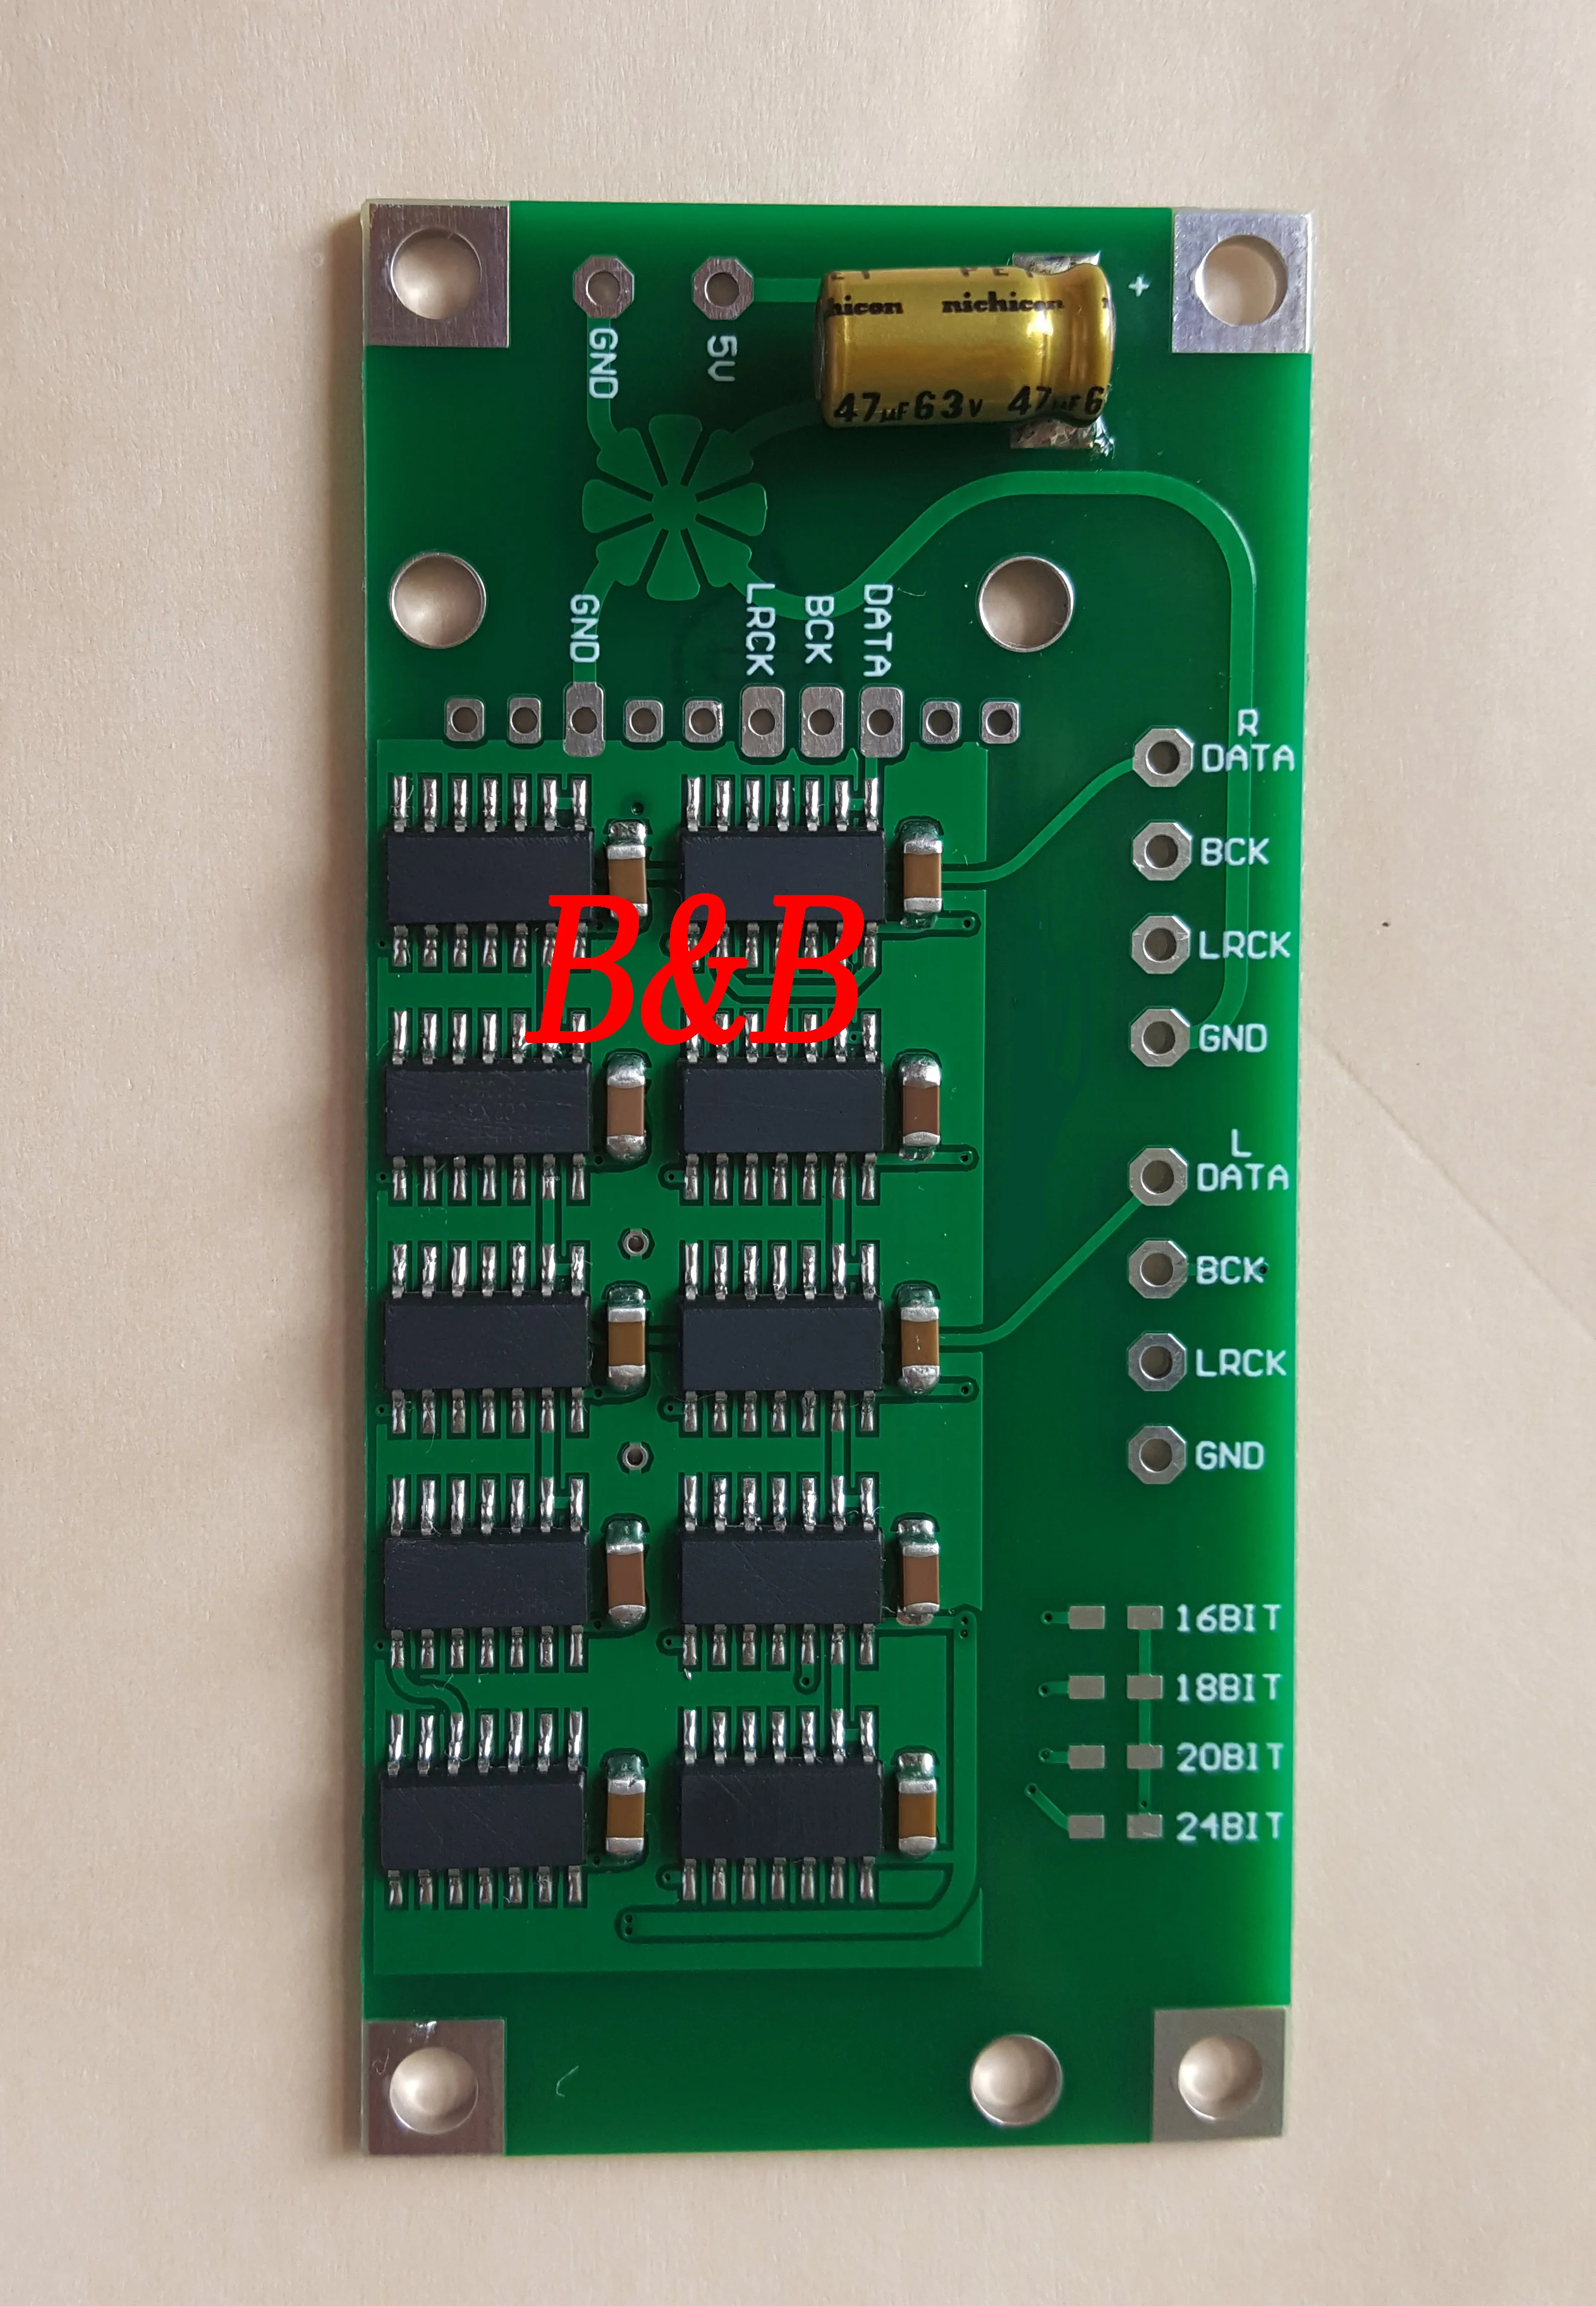 NOS DAC/I2S Format NOS decoder shifter board and I2S data conversion right aligned format